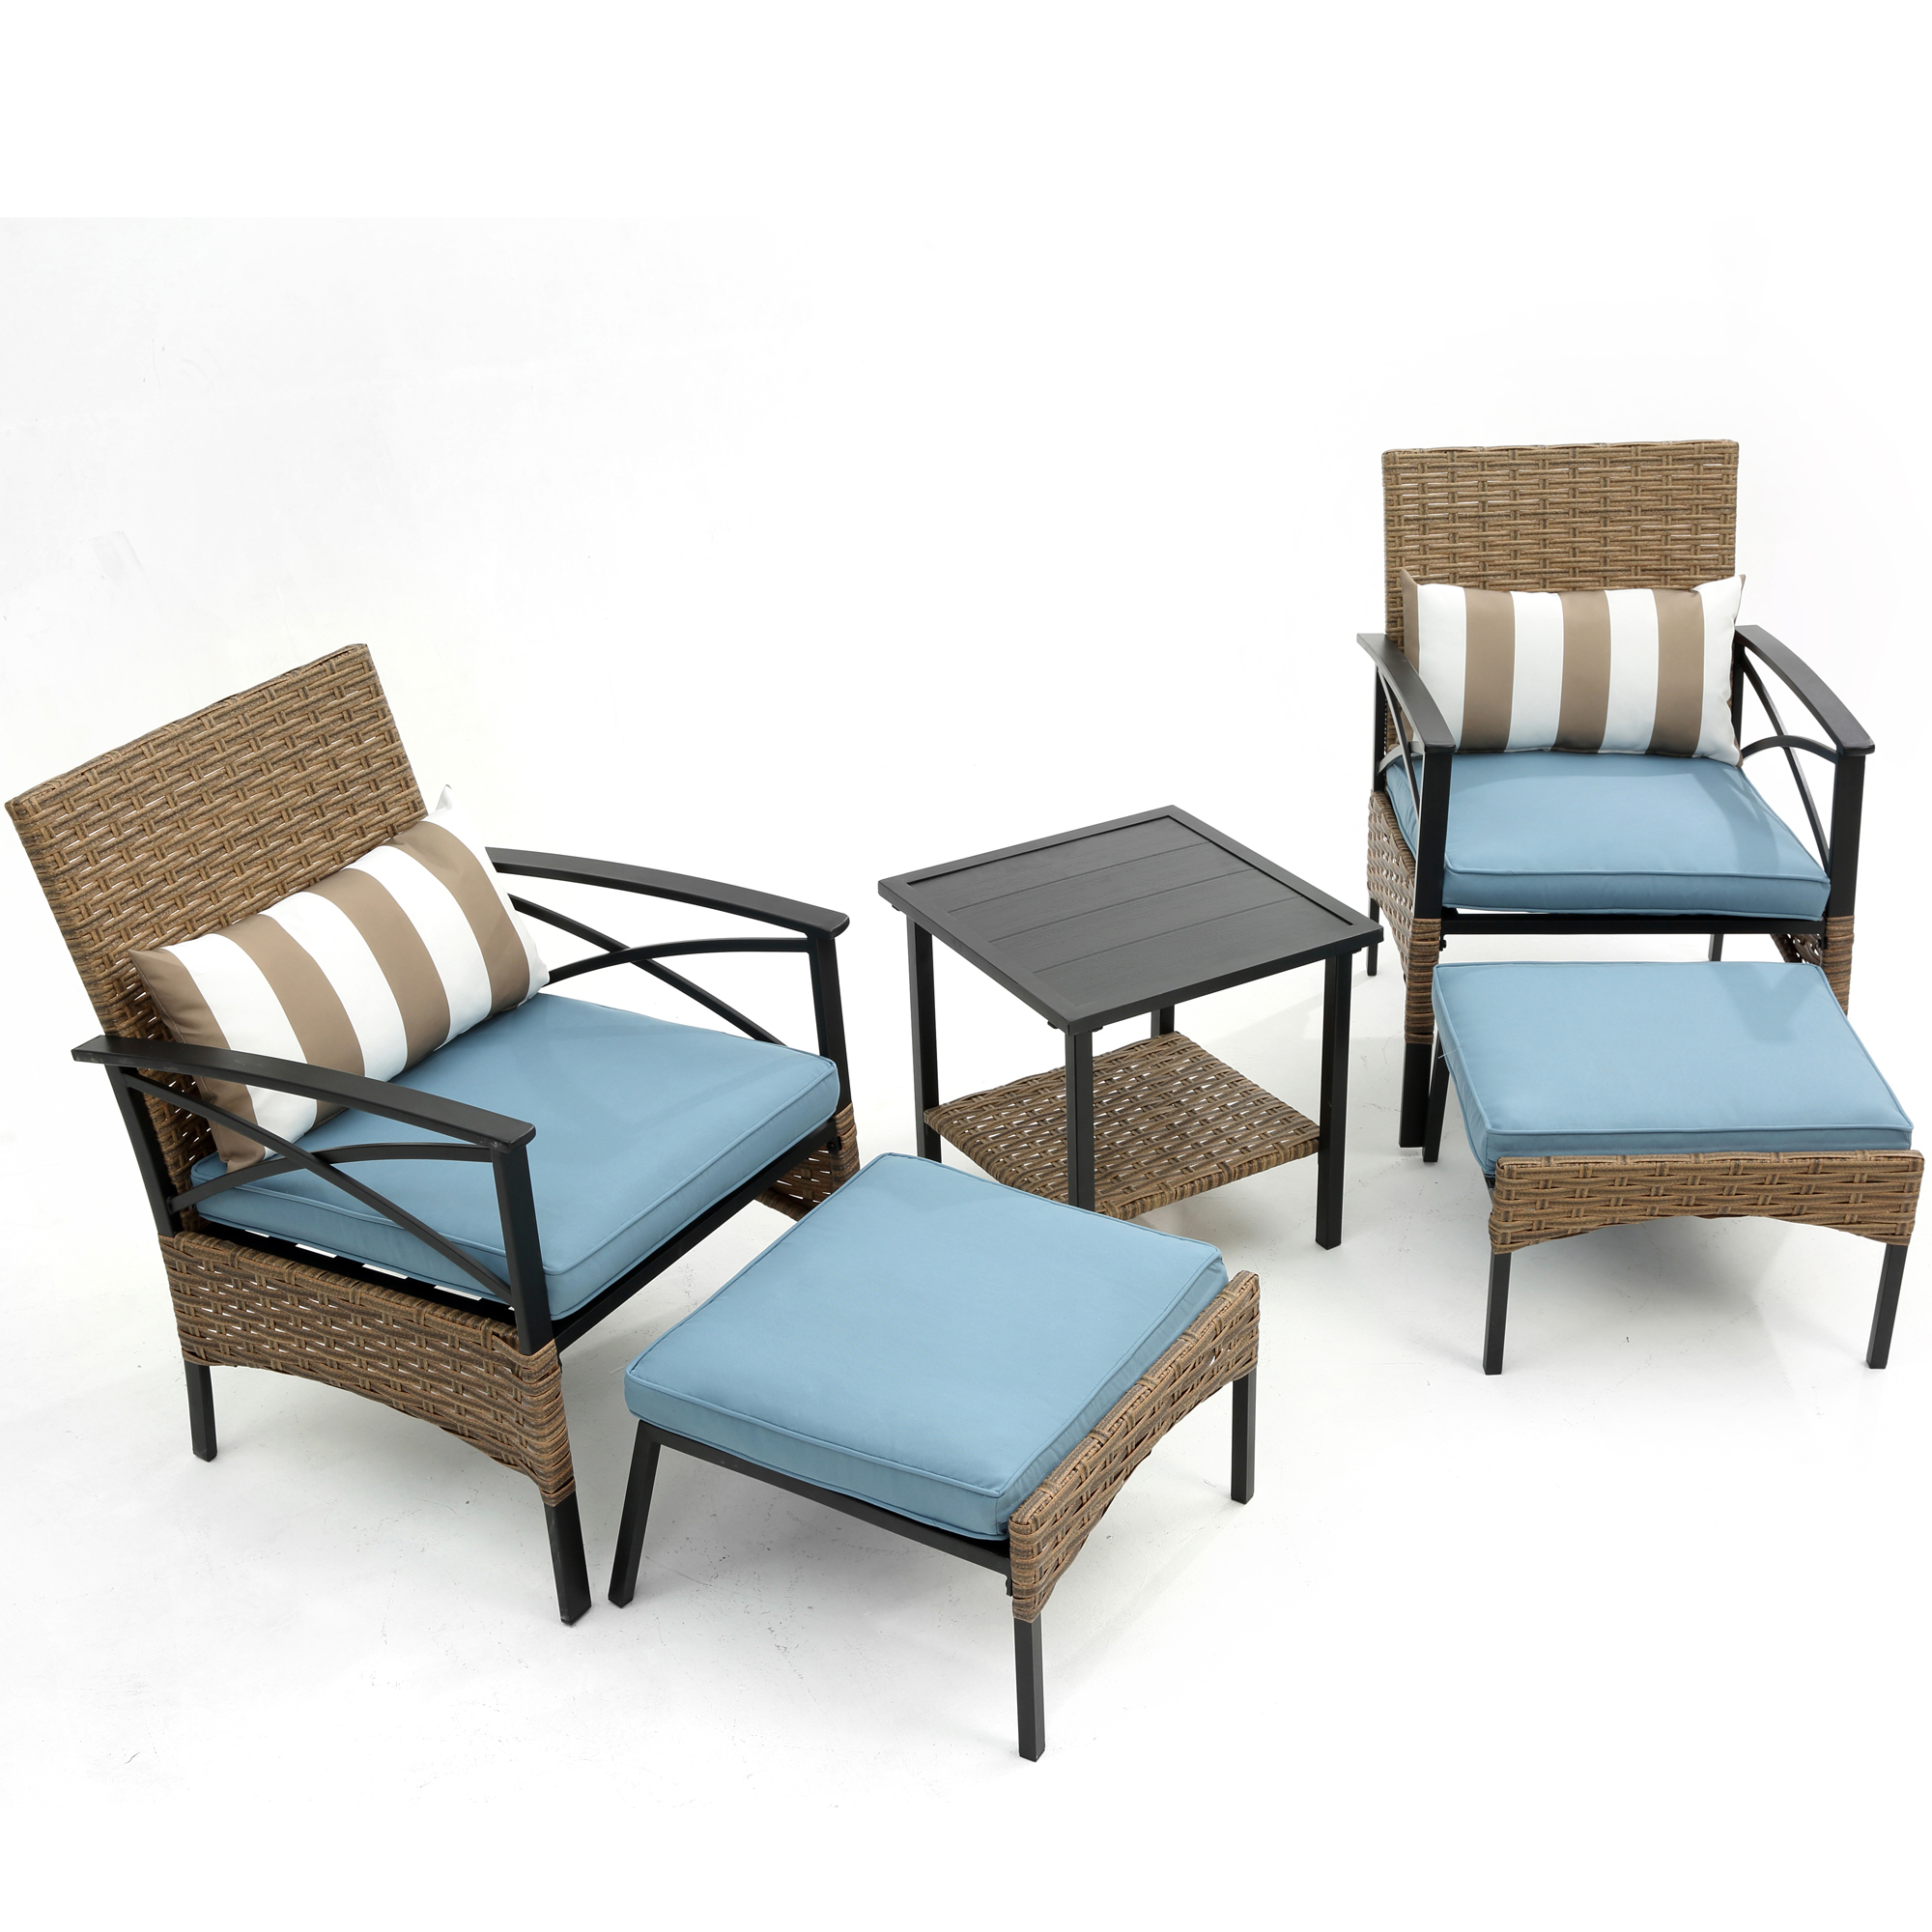 Patio Chairs with Ottomans Set of 2, HSUNNS 5 Piece Balcony Furniture Wicker Patio Chairs with Side Table Set, Cushioned Outdoor Lounge Chair in Black Metal Frame, Blue Remove Cushions - image 1 of 12